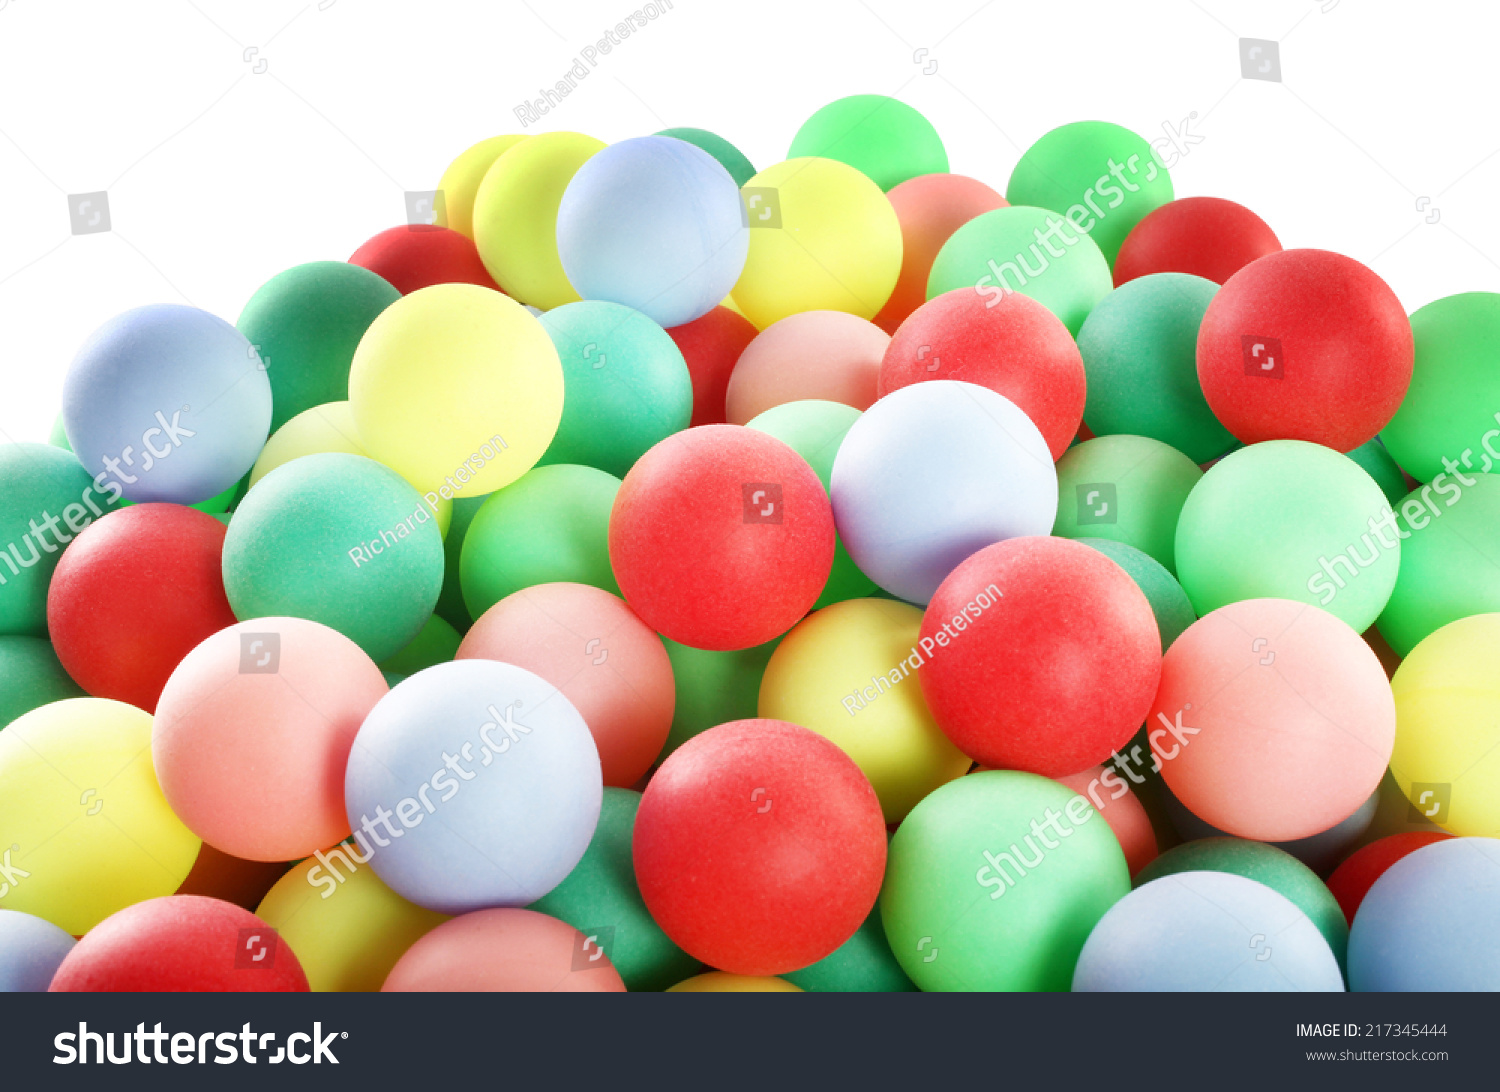 Huge pile of colorful balls #217345444